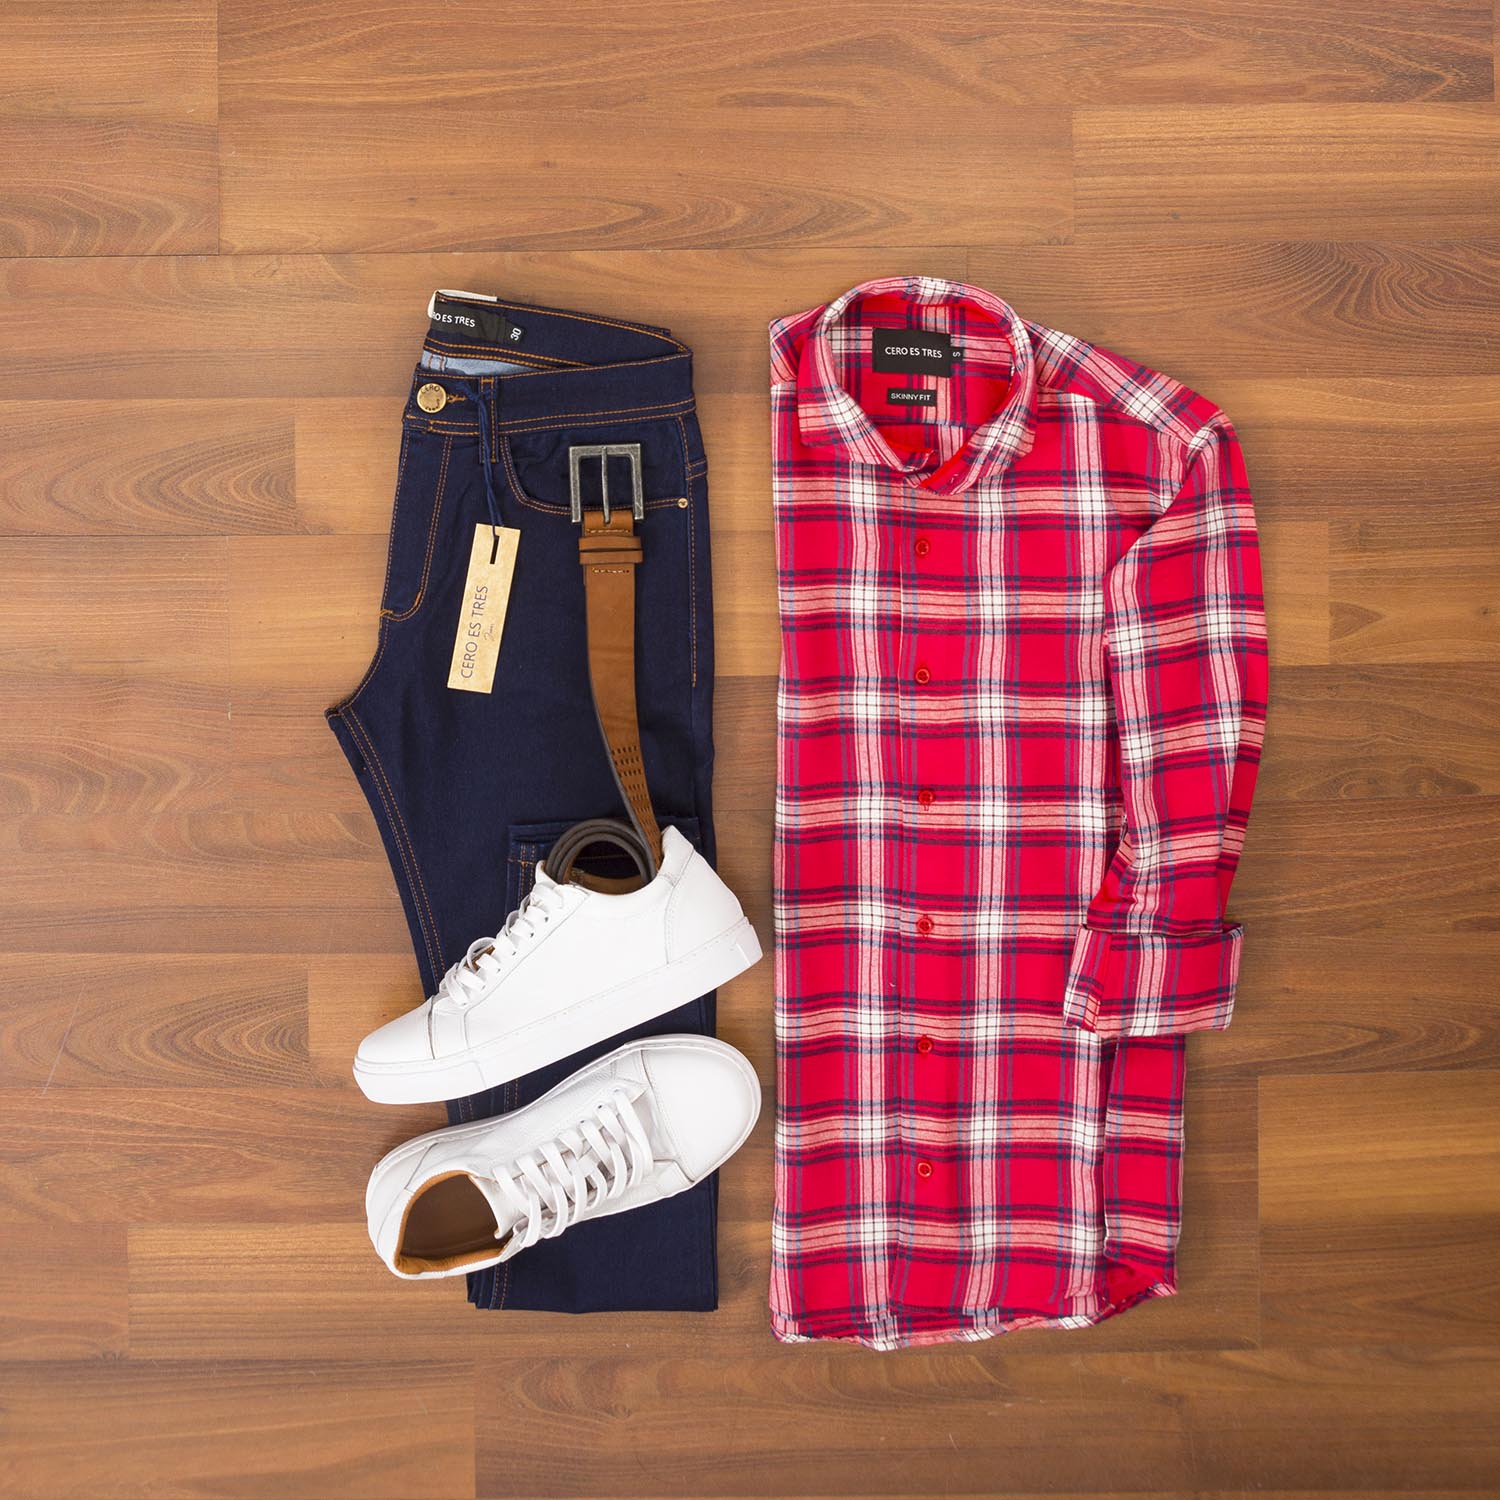 OUTFIT CERO 236